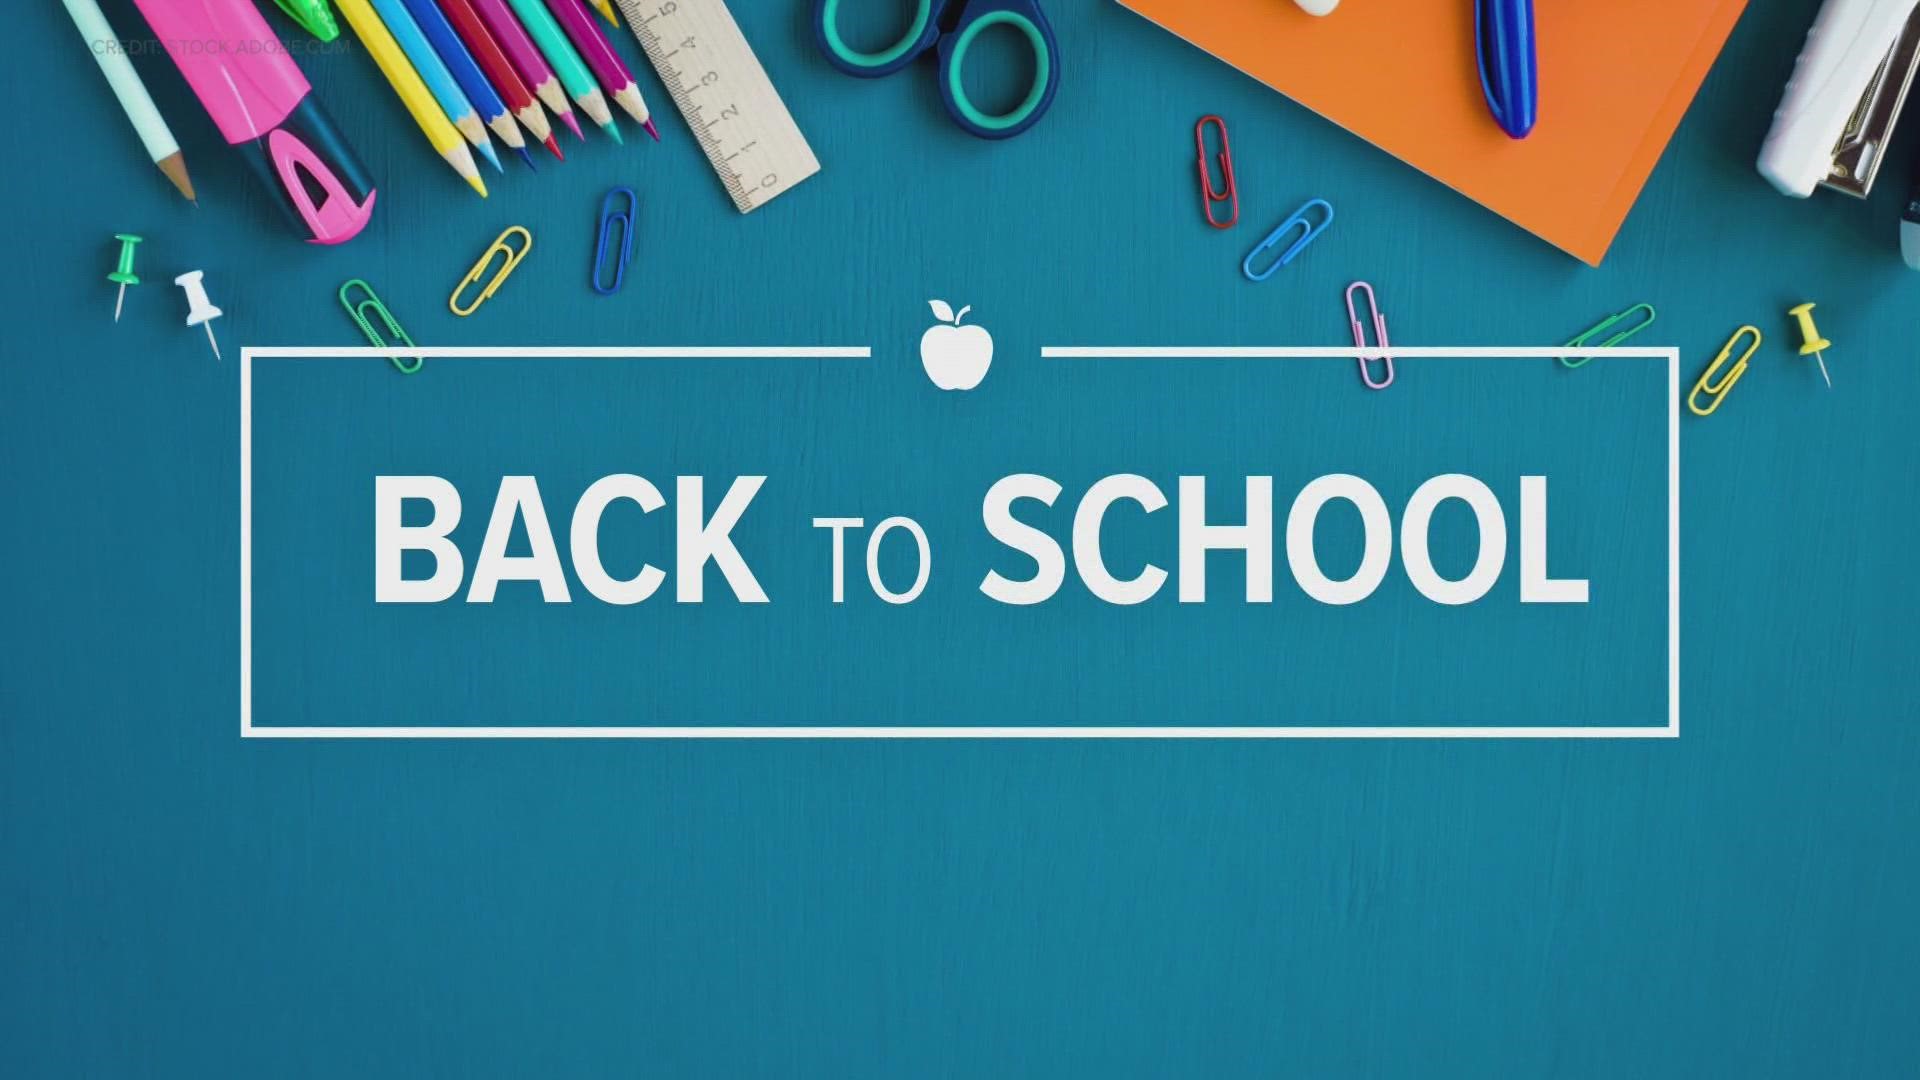 Back to school for many central Indiana students